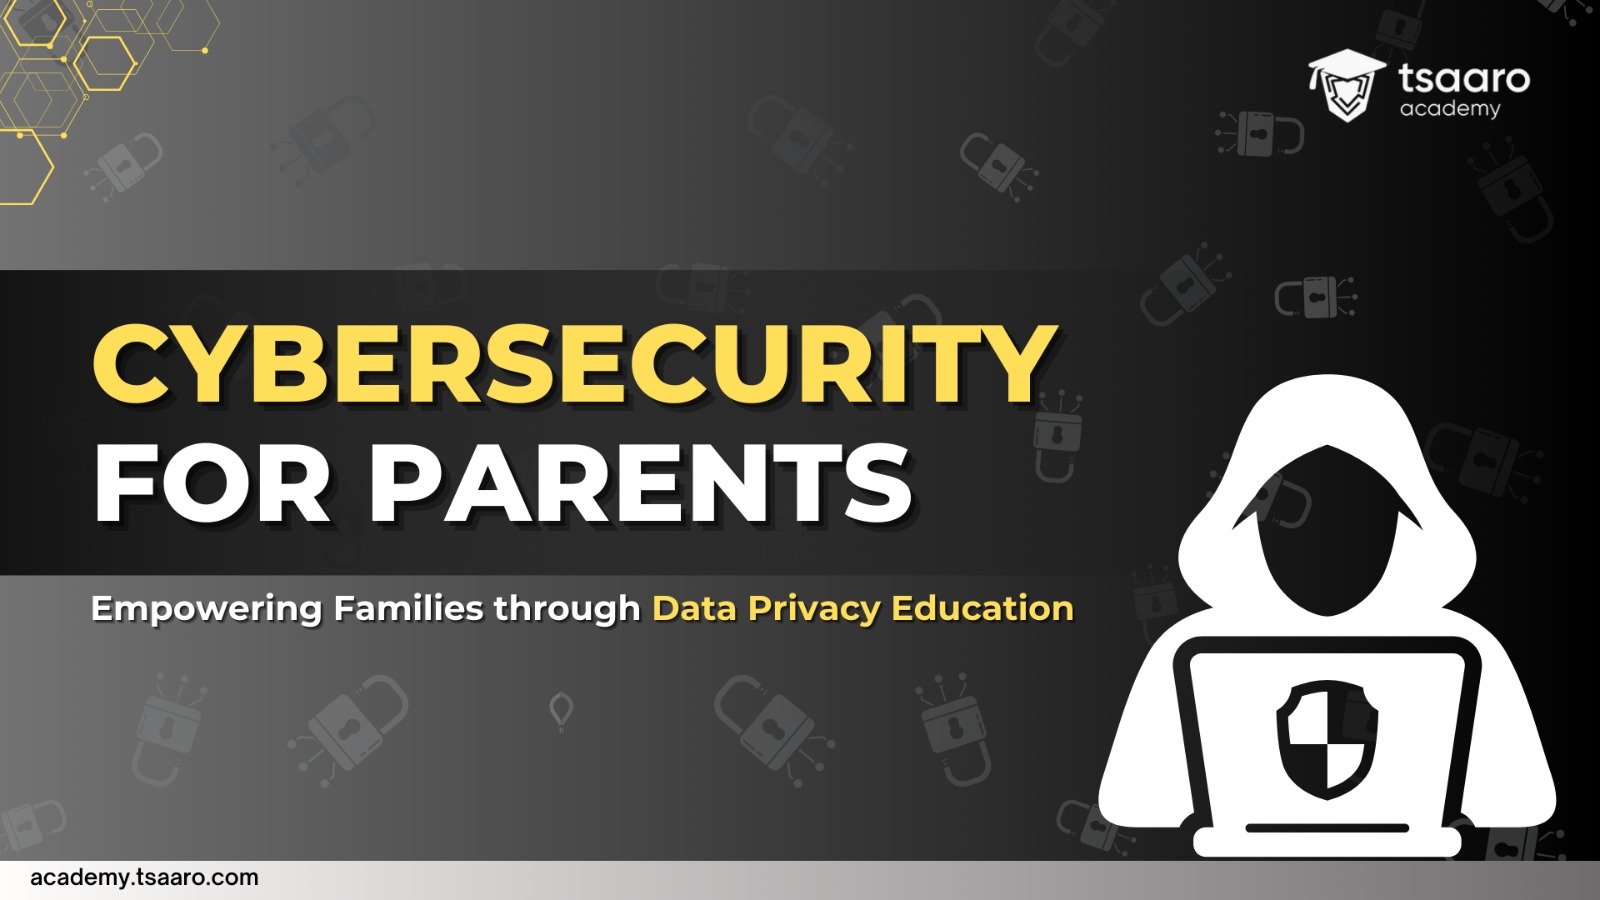 Empowering Families through Data Privacy Education